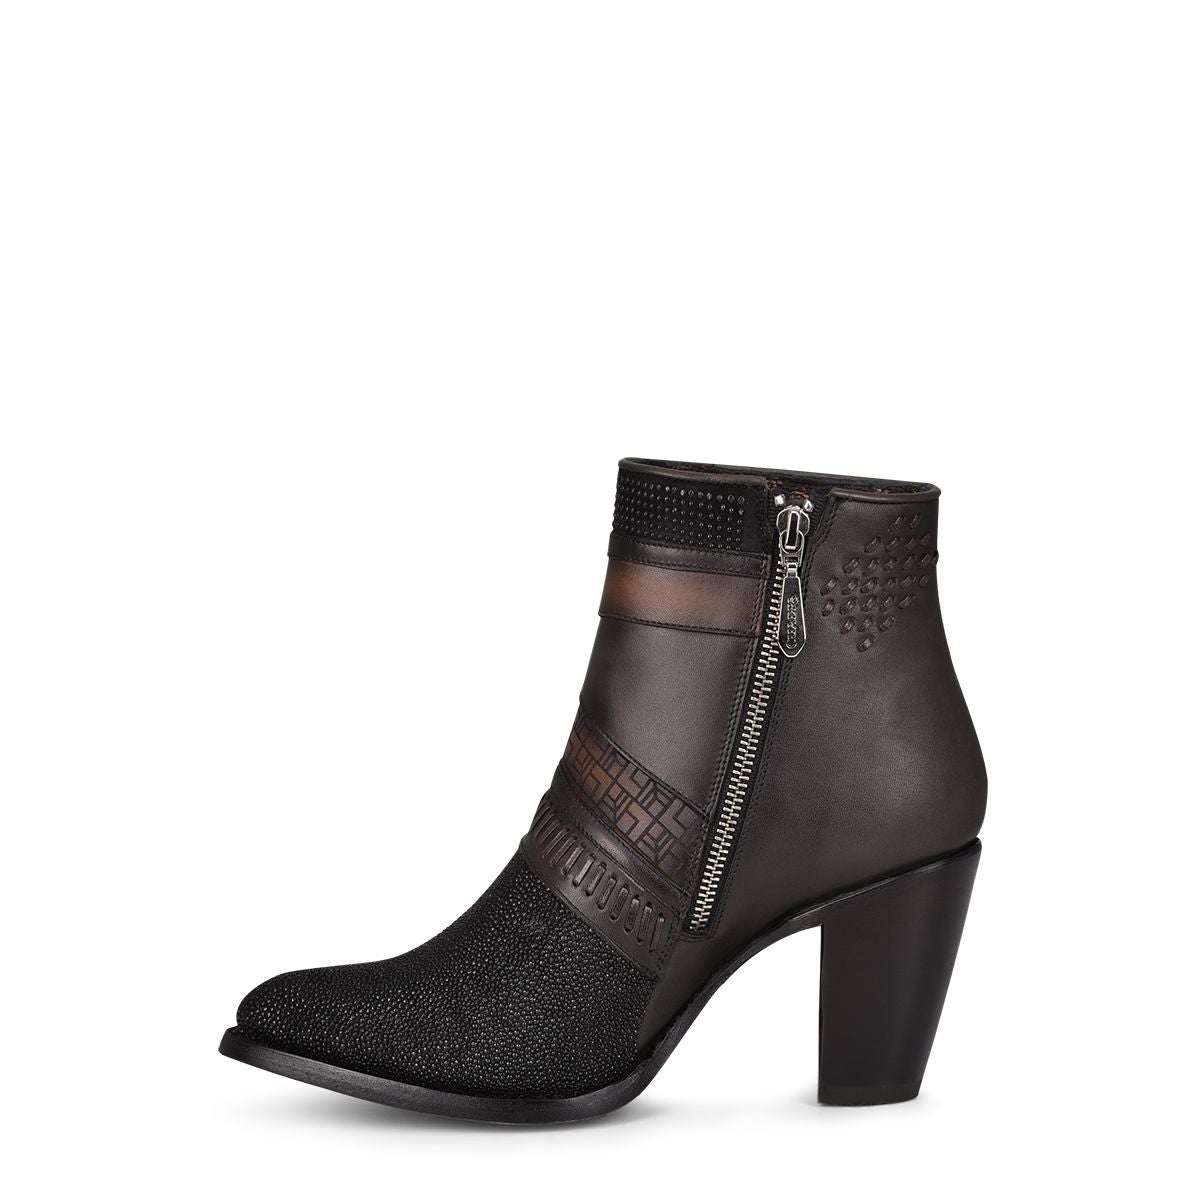 3F86MA- Cuadra black casual stingray leather ankle boots for women-Kuet.us